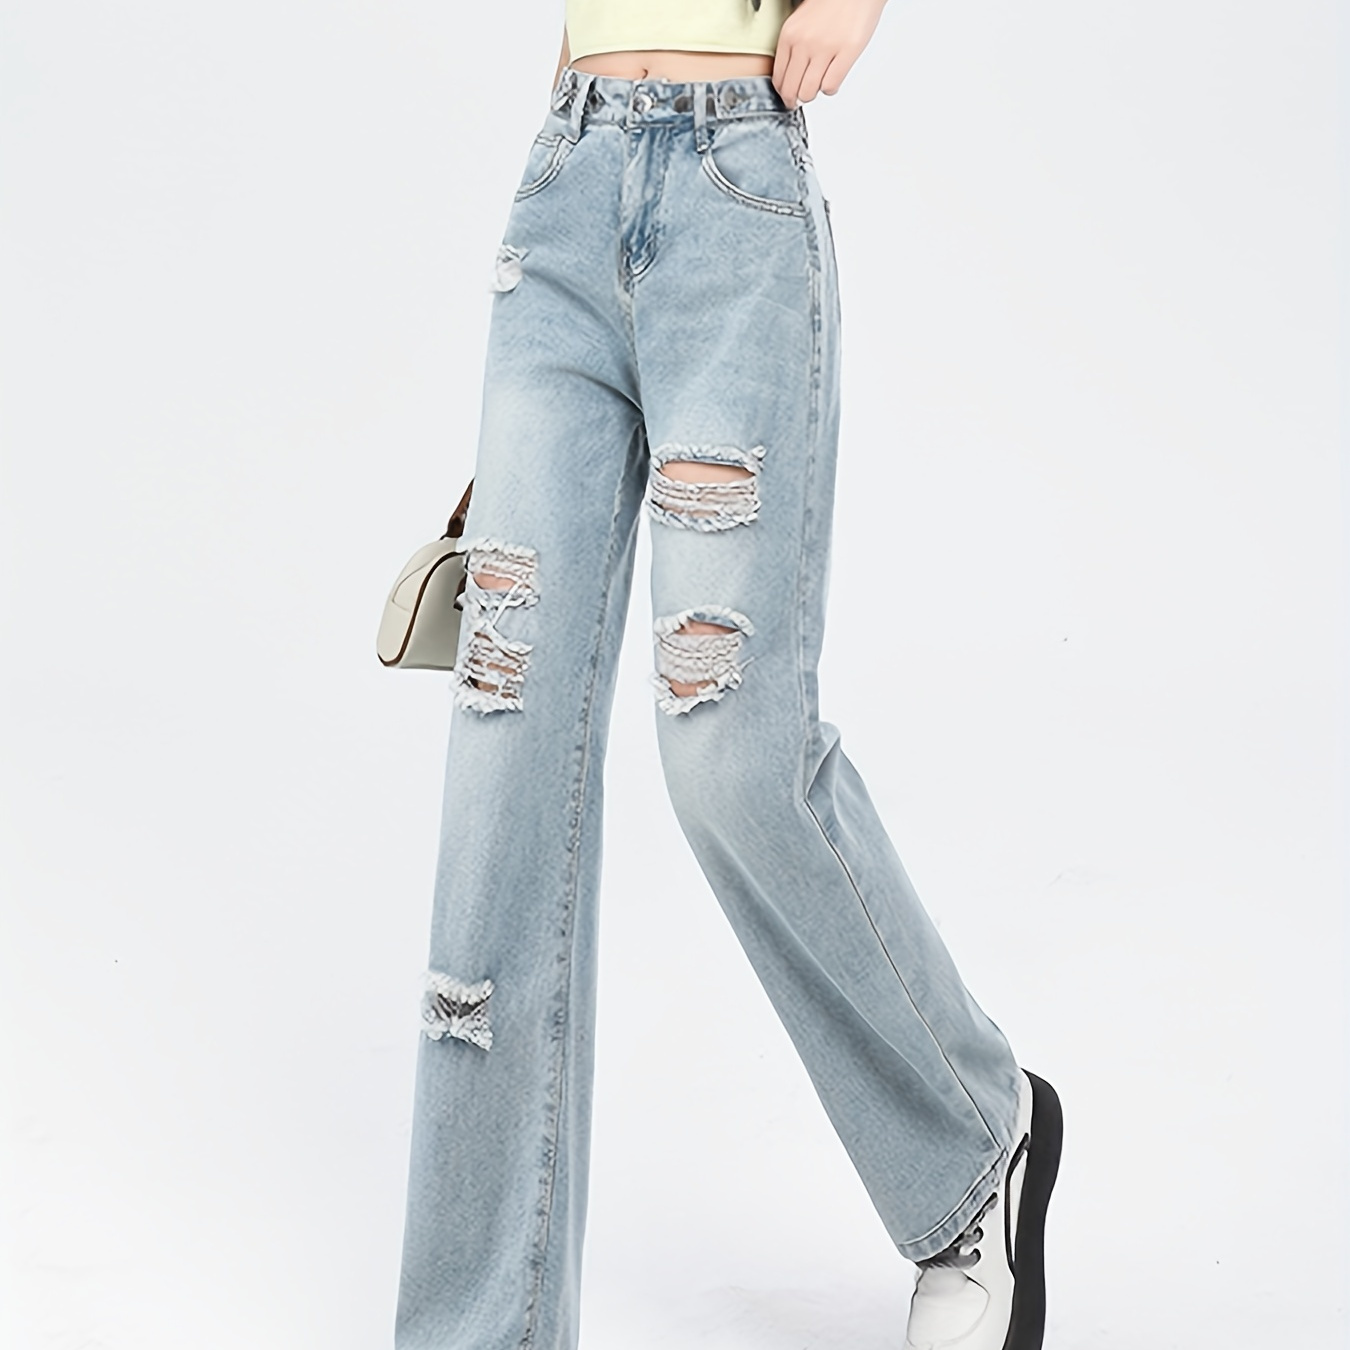 

Ripped Plain Straight Leg Jeans, Washed Blue Distressed High Rise Denim Pants, Women's Denim Jeans & Clothing